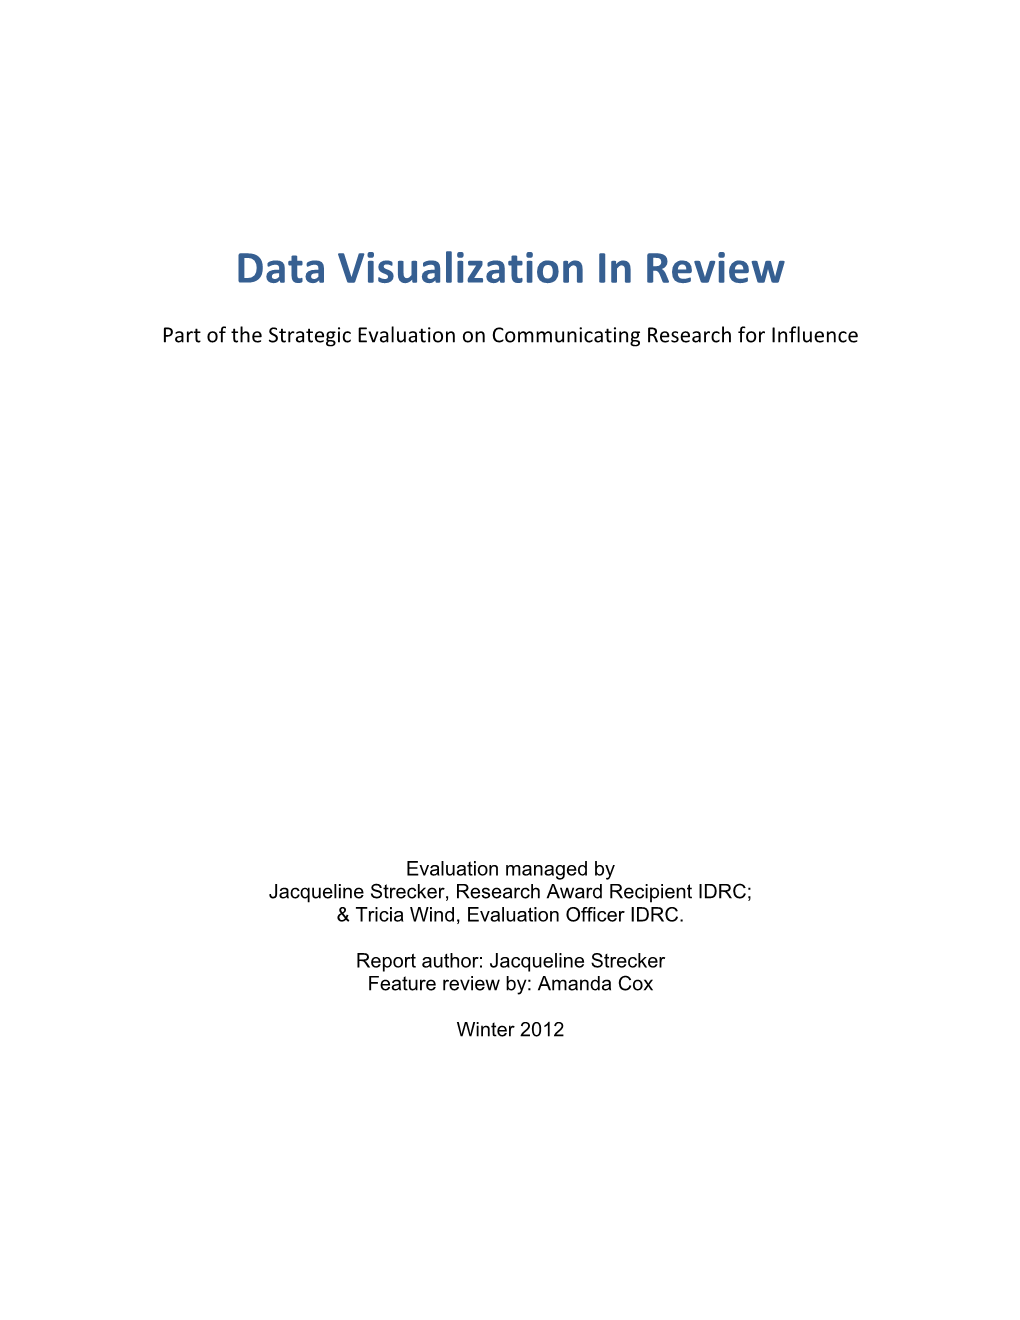 Data Visualization in Review